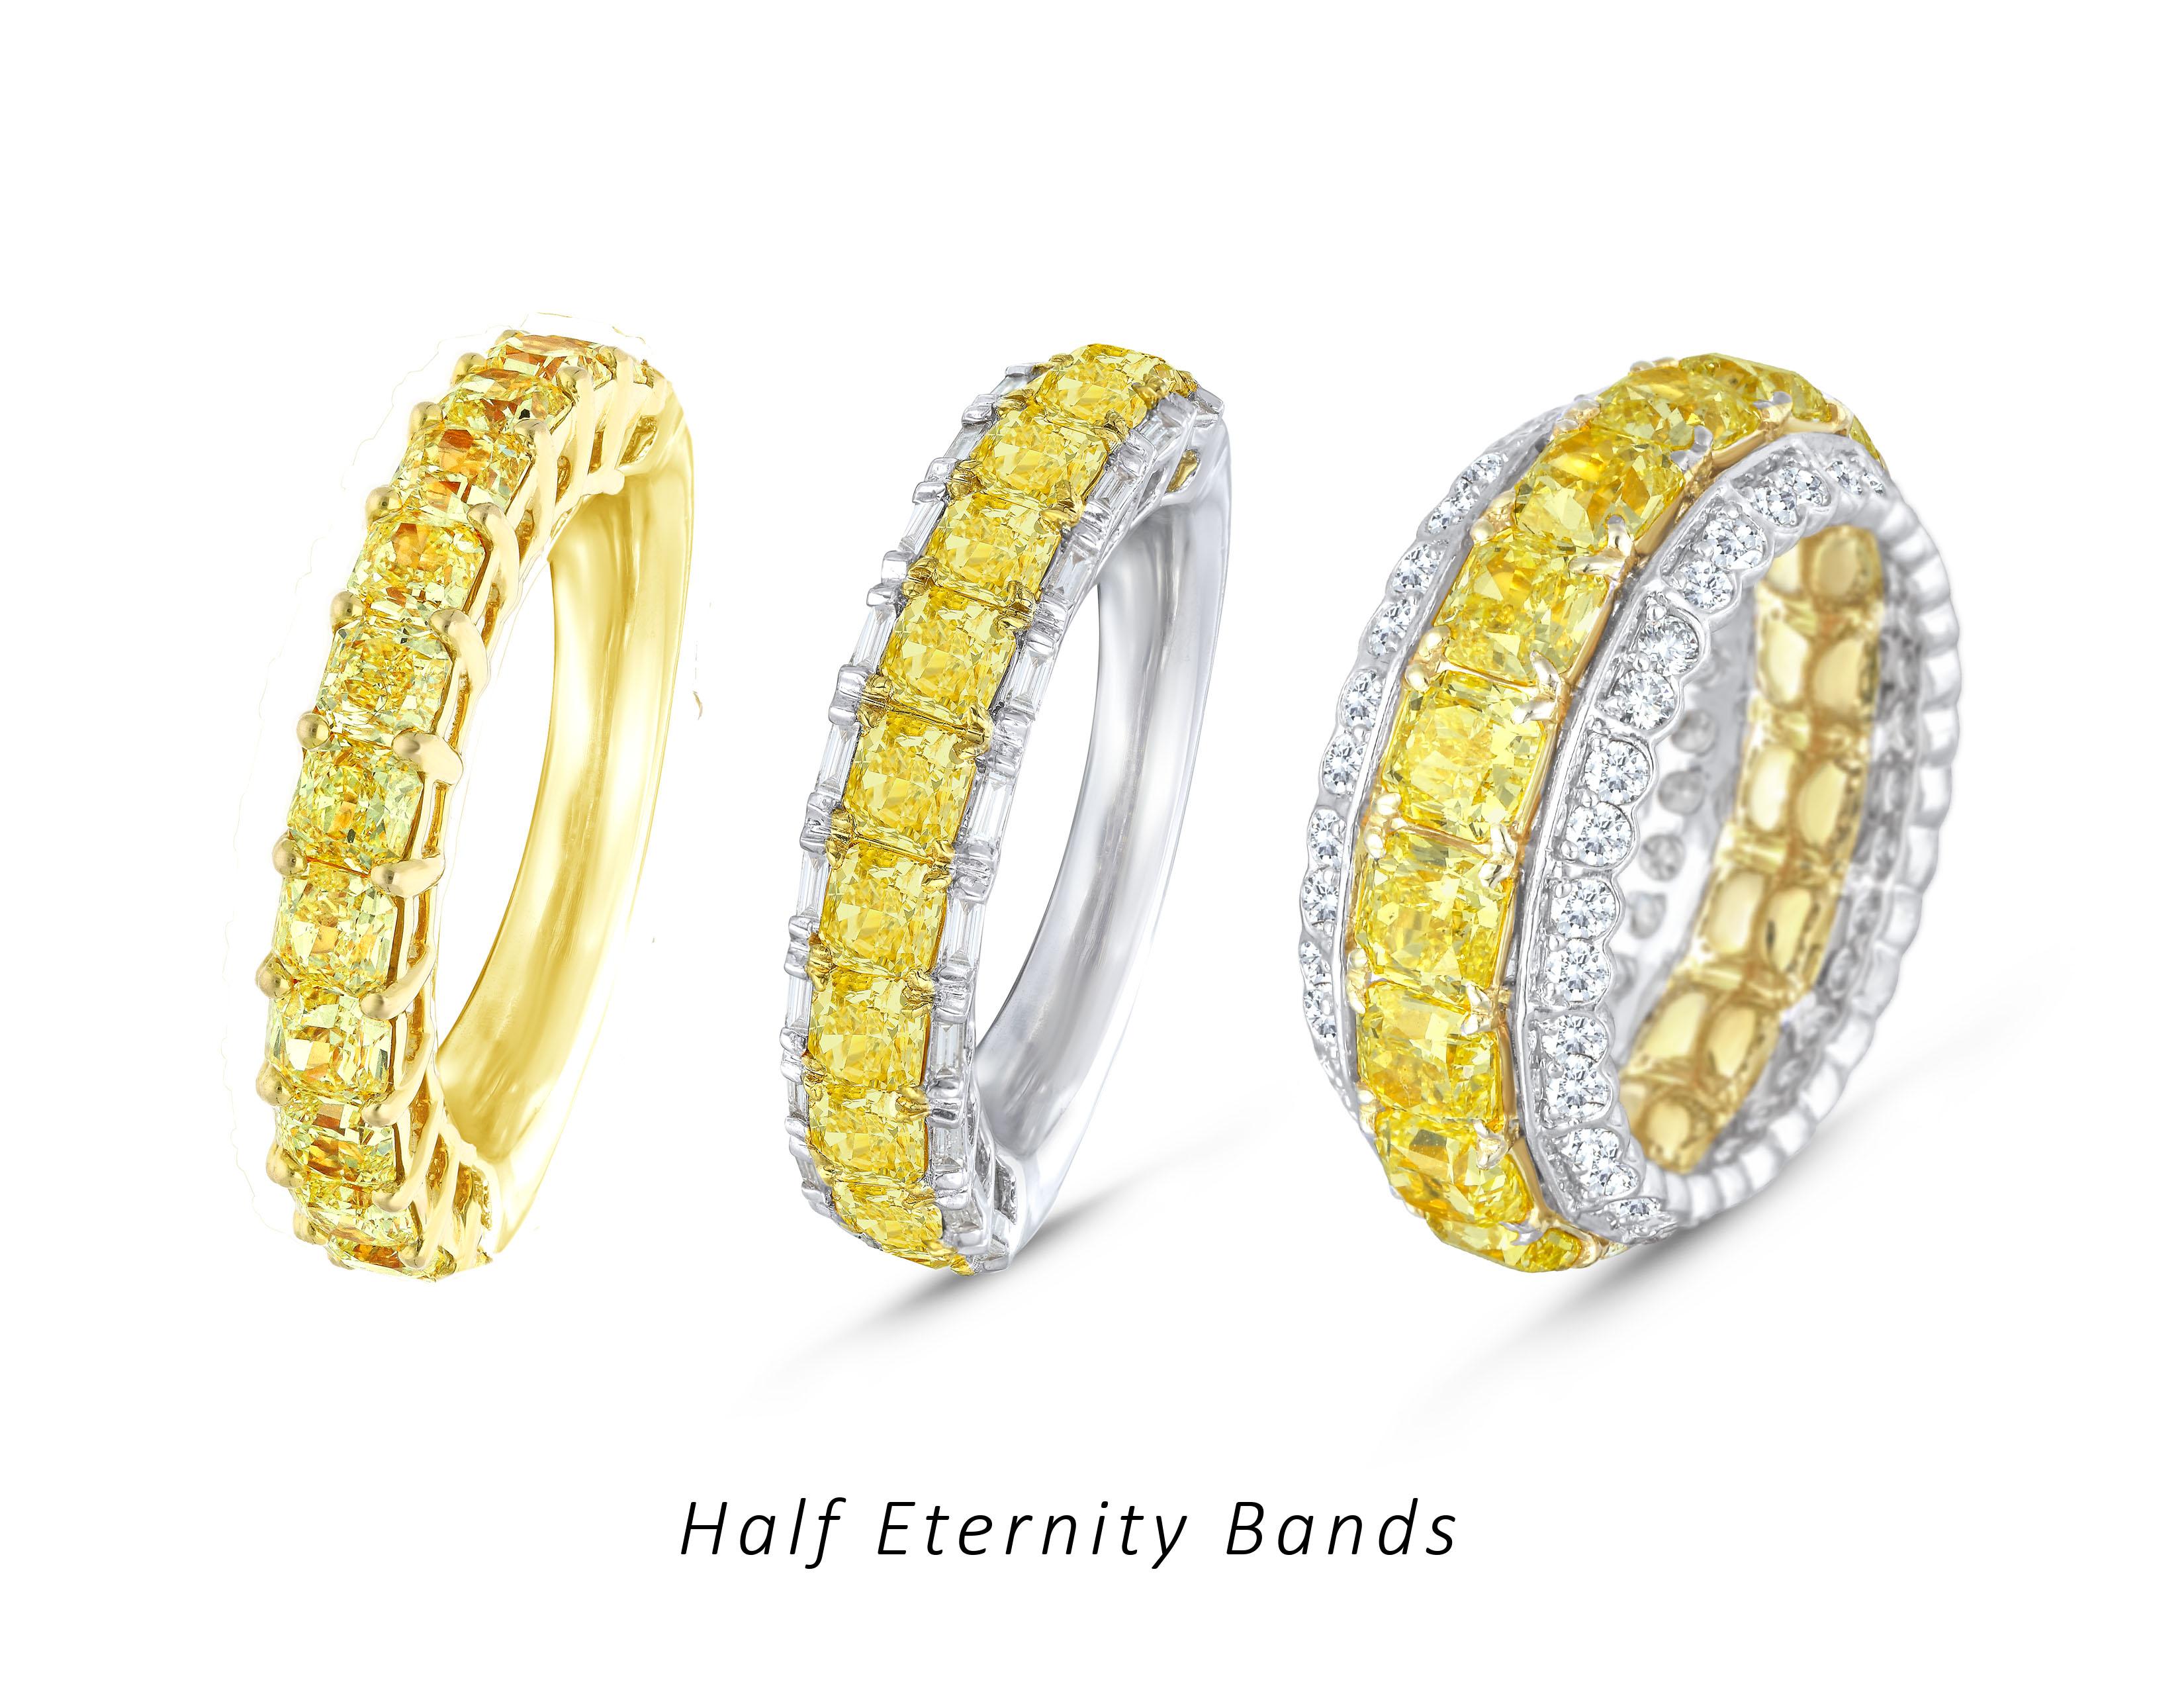 Radiant Cut Eternity Band Half with Baguettes, 2.05 Carat